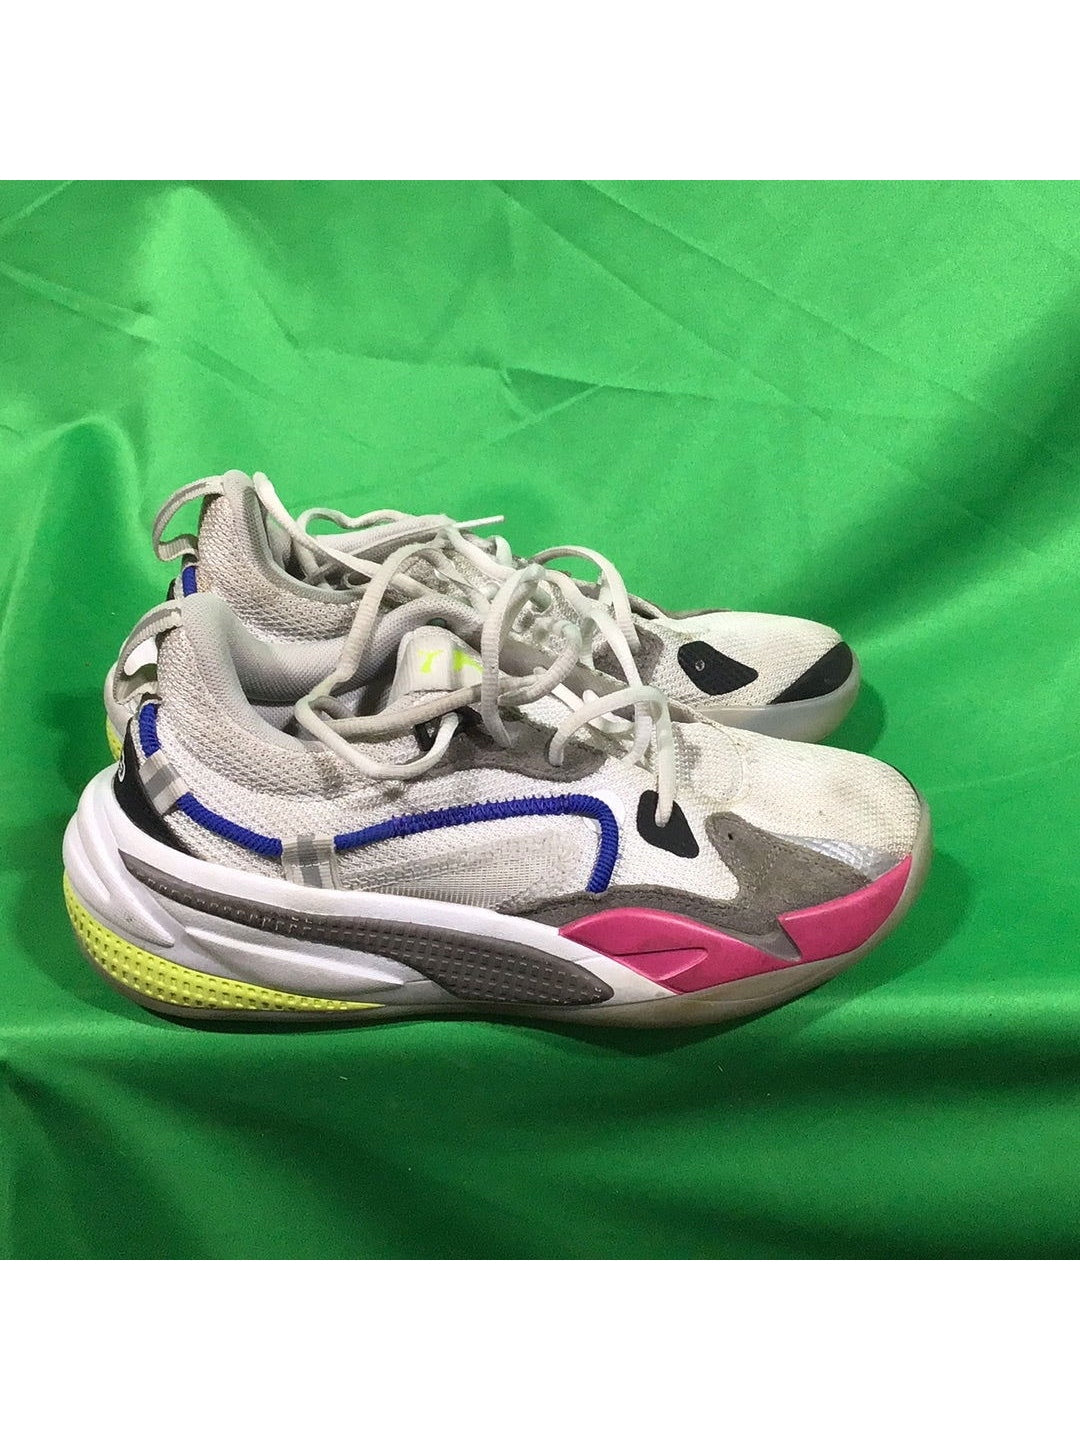 Puma RS-Dreamer Men’s Basketball Size 6C Shoes - The Kennedy Collective Thrift - 